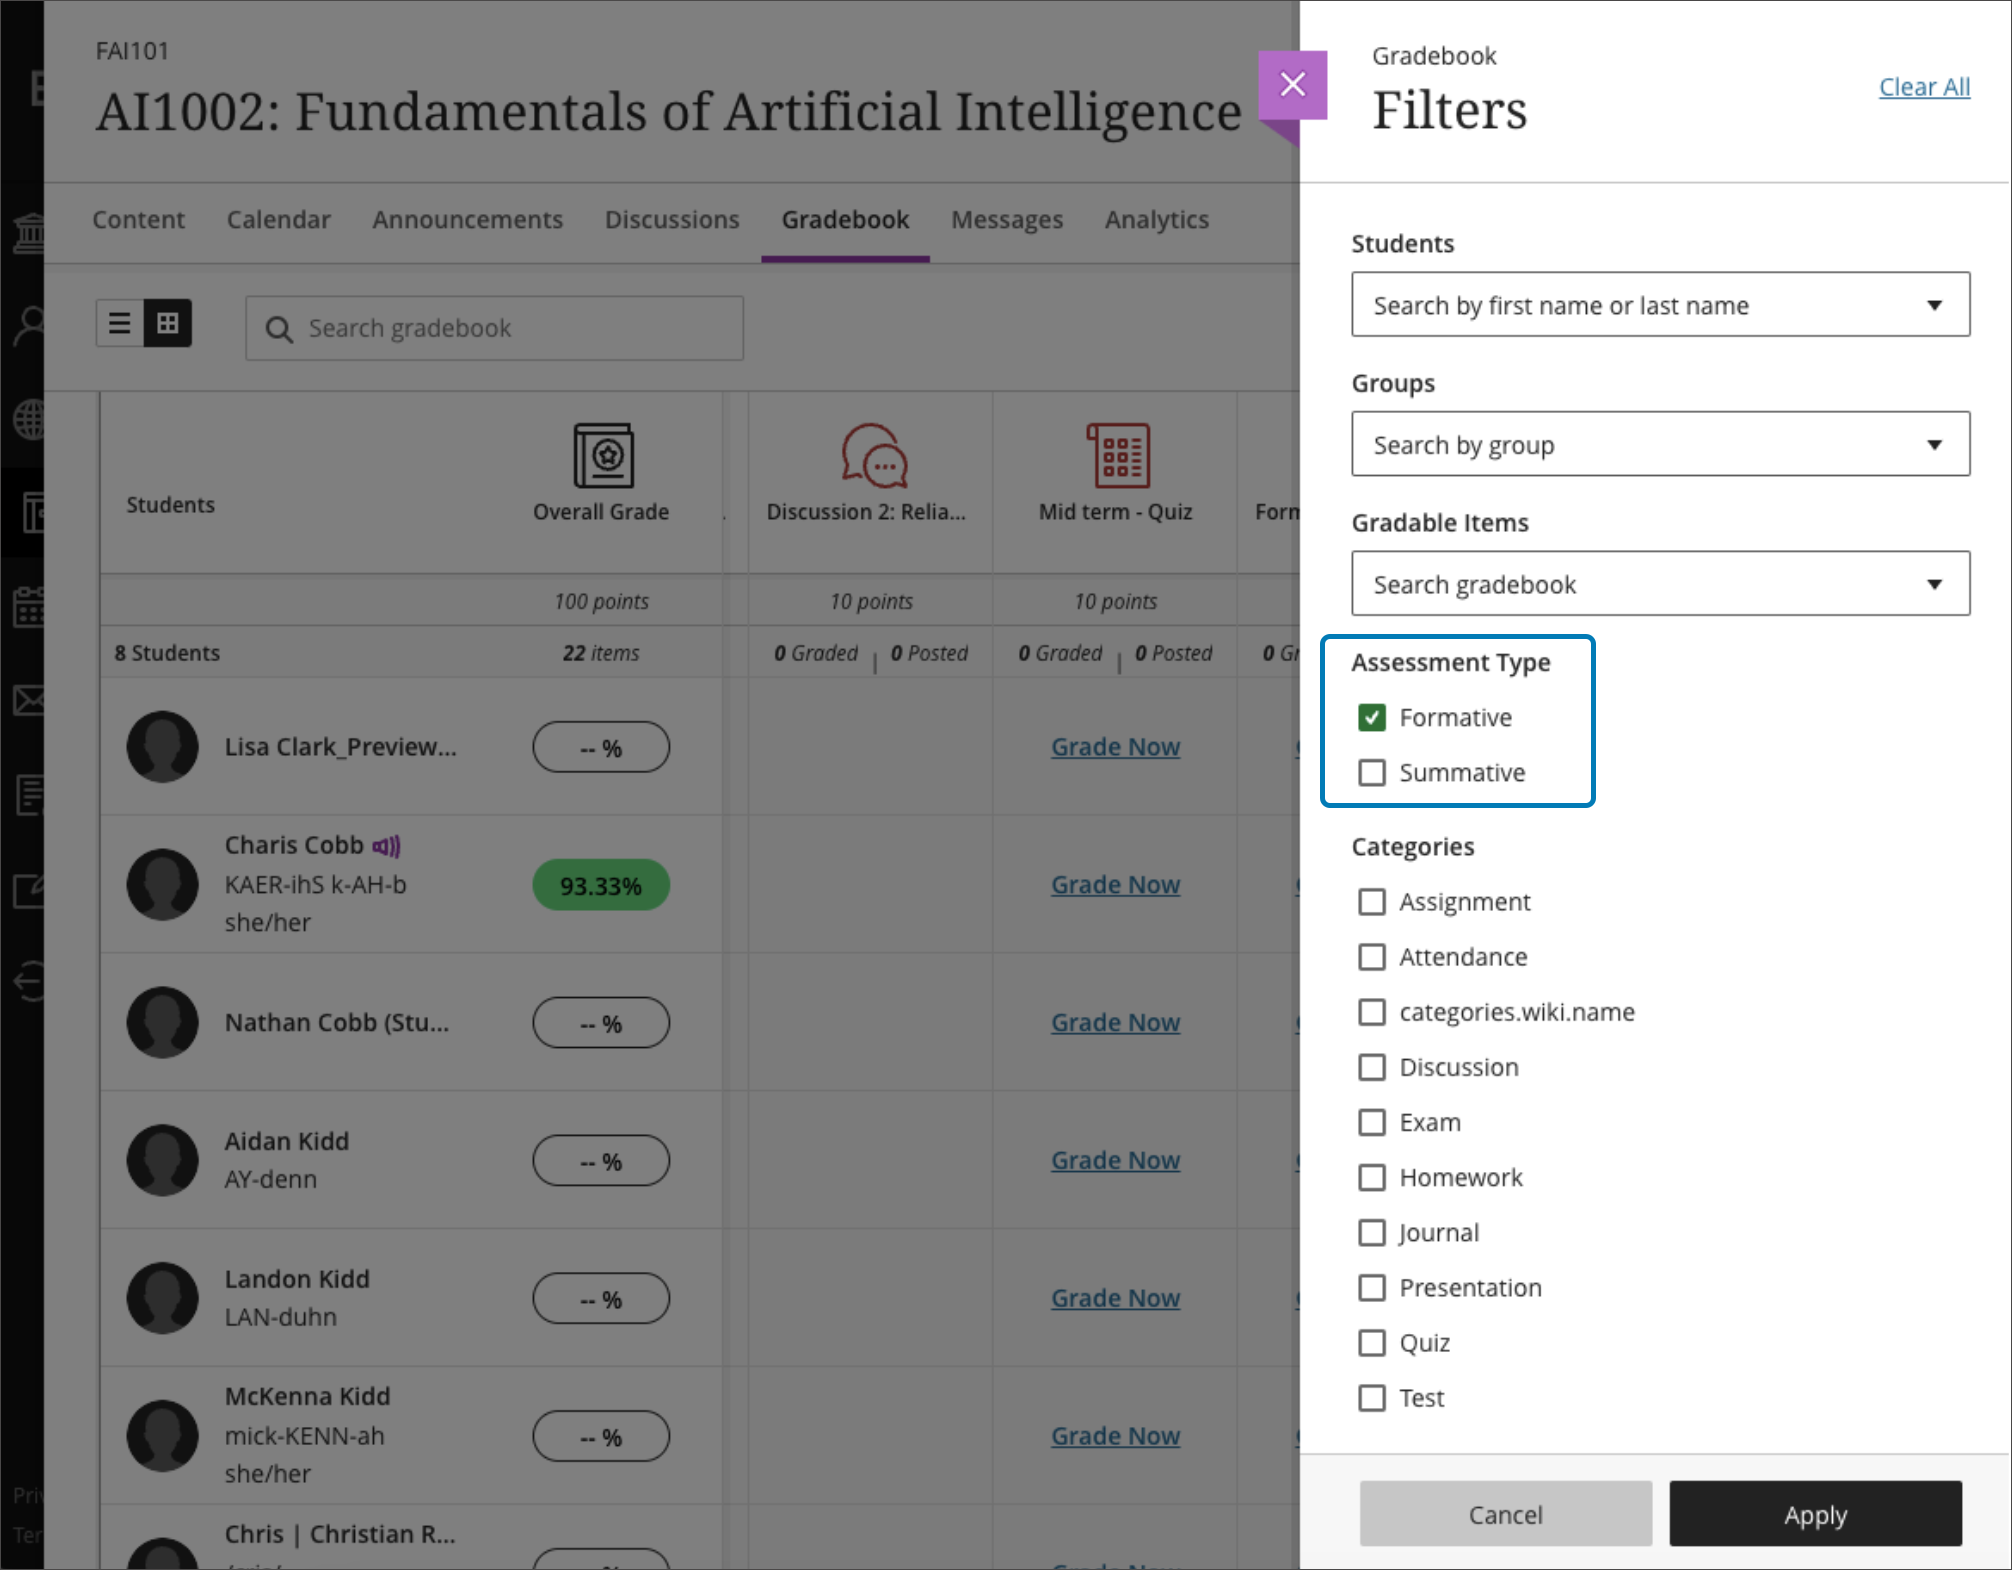 Gradebook grid view – filter option with formative assessment type selected